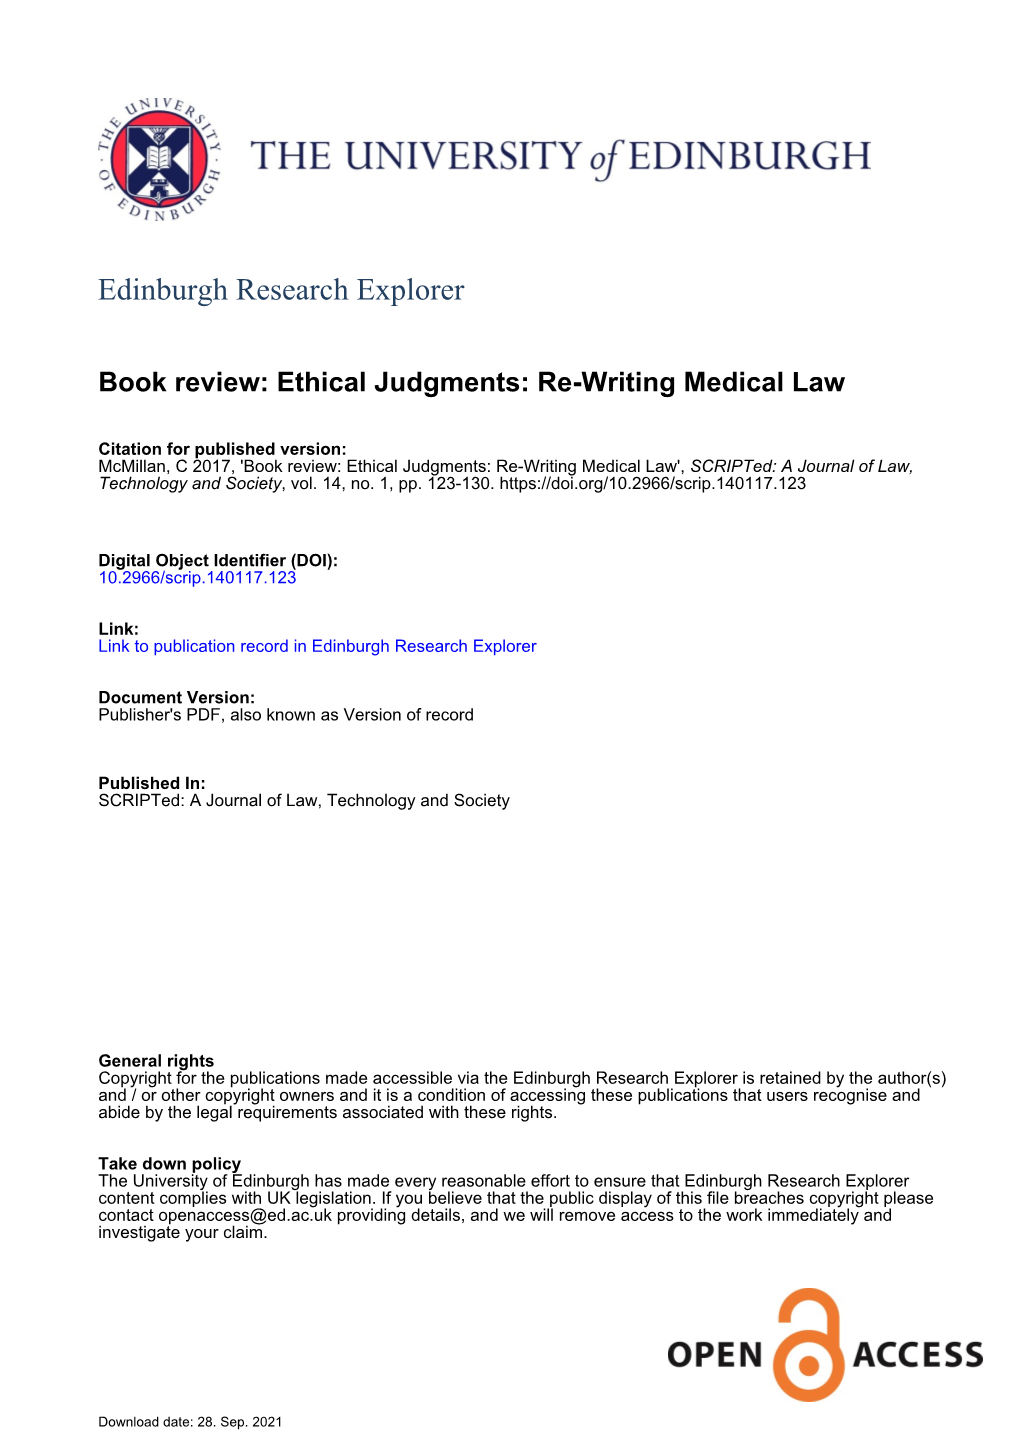 Book Review: Ethical Judgments: Re-Writing Medical Law